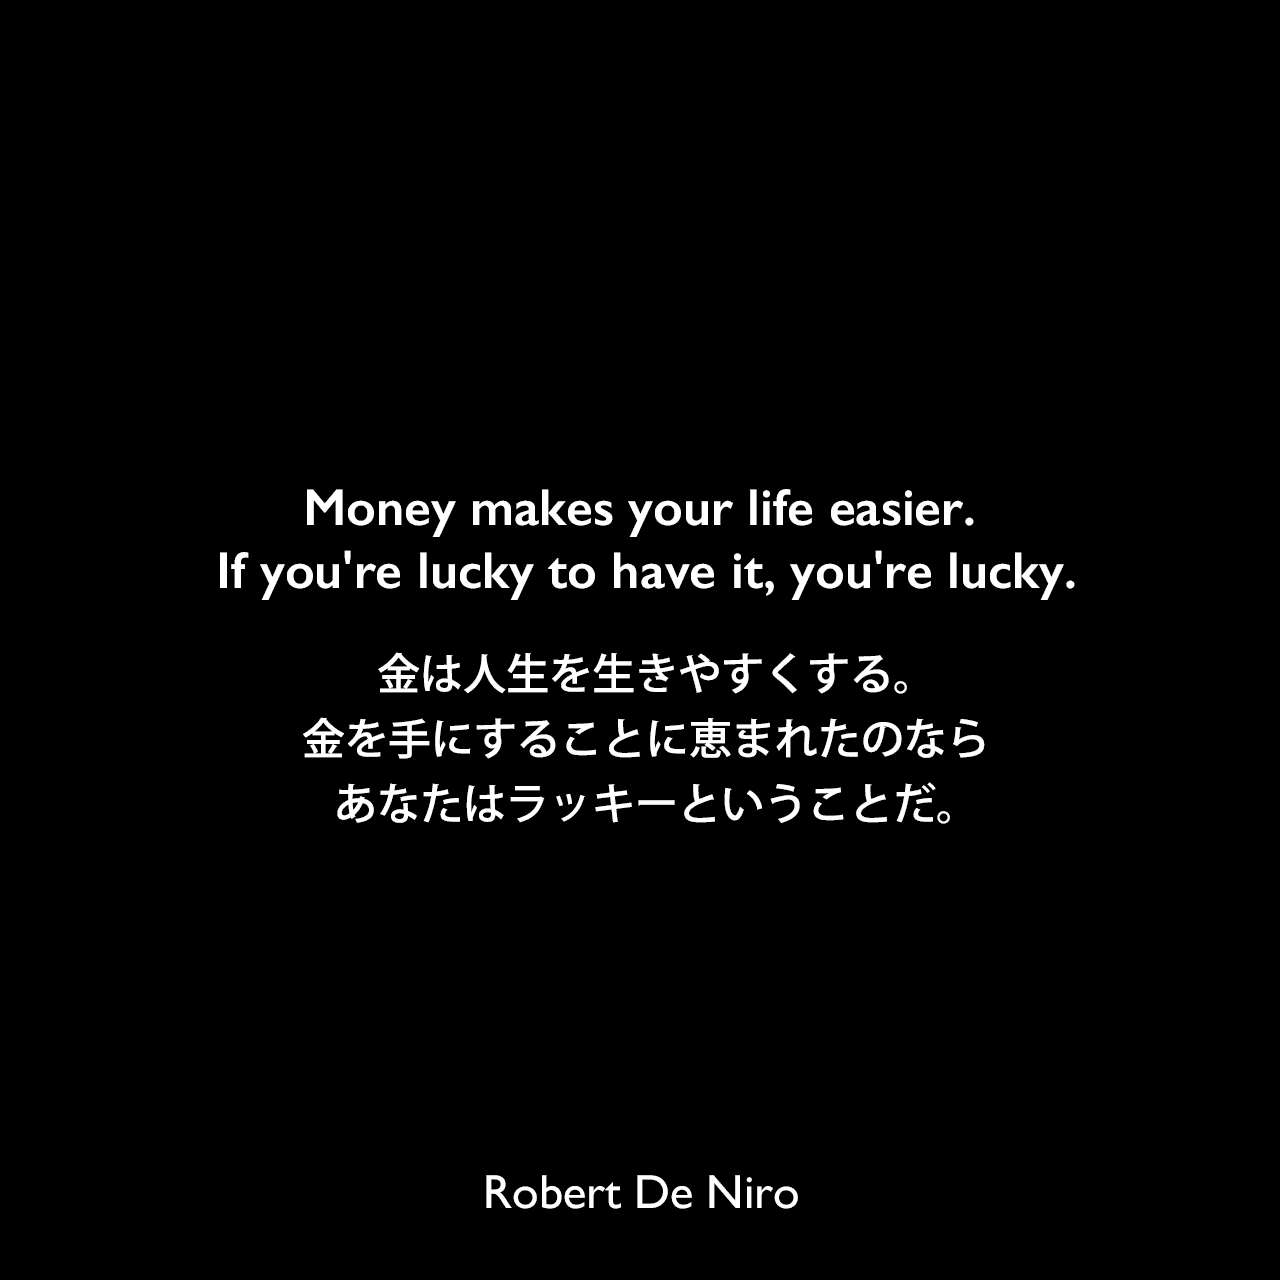 Money makes your life easier. If you're lucky to have it, you're lucky.金は人生を生きやすくする。金を手にすることに恵まれたのならあなたはラッキーということだ。Robert De Niro